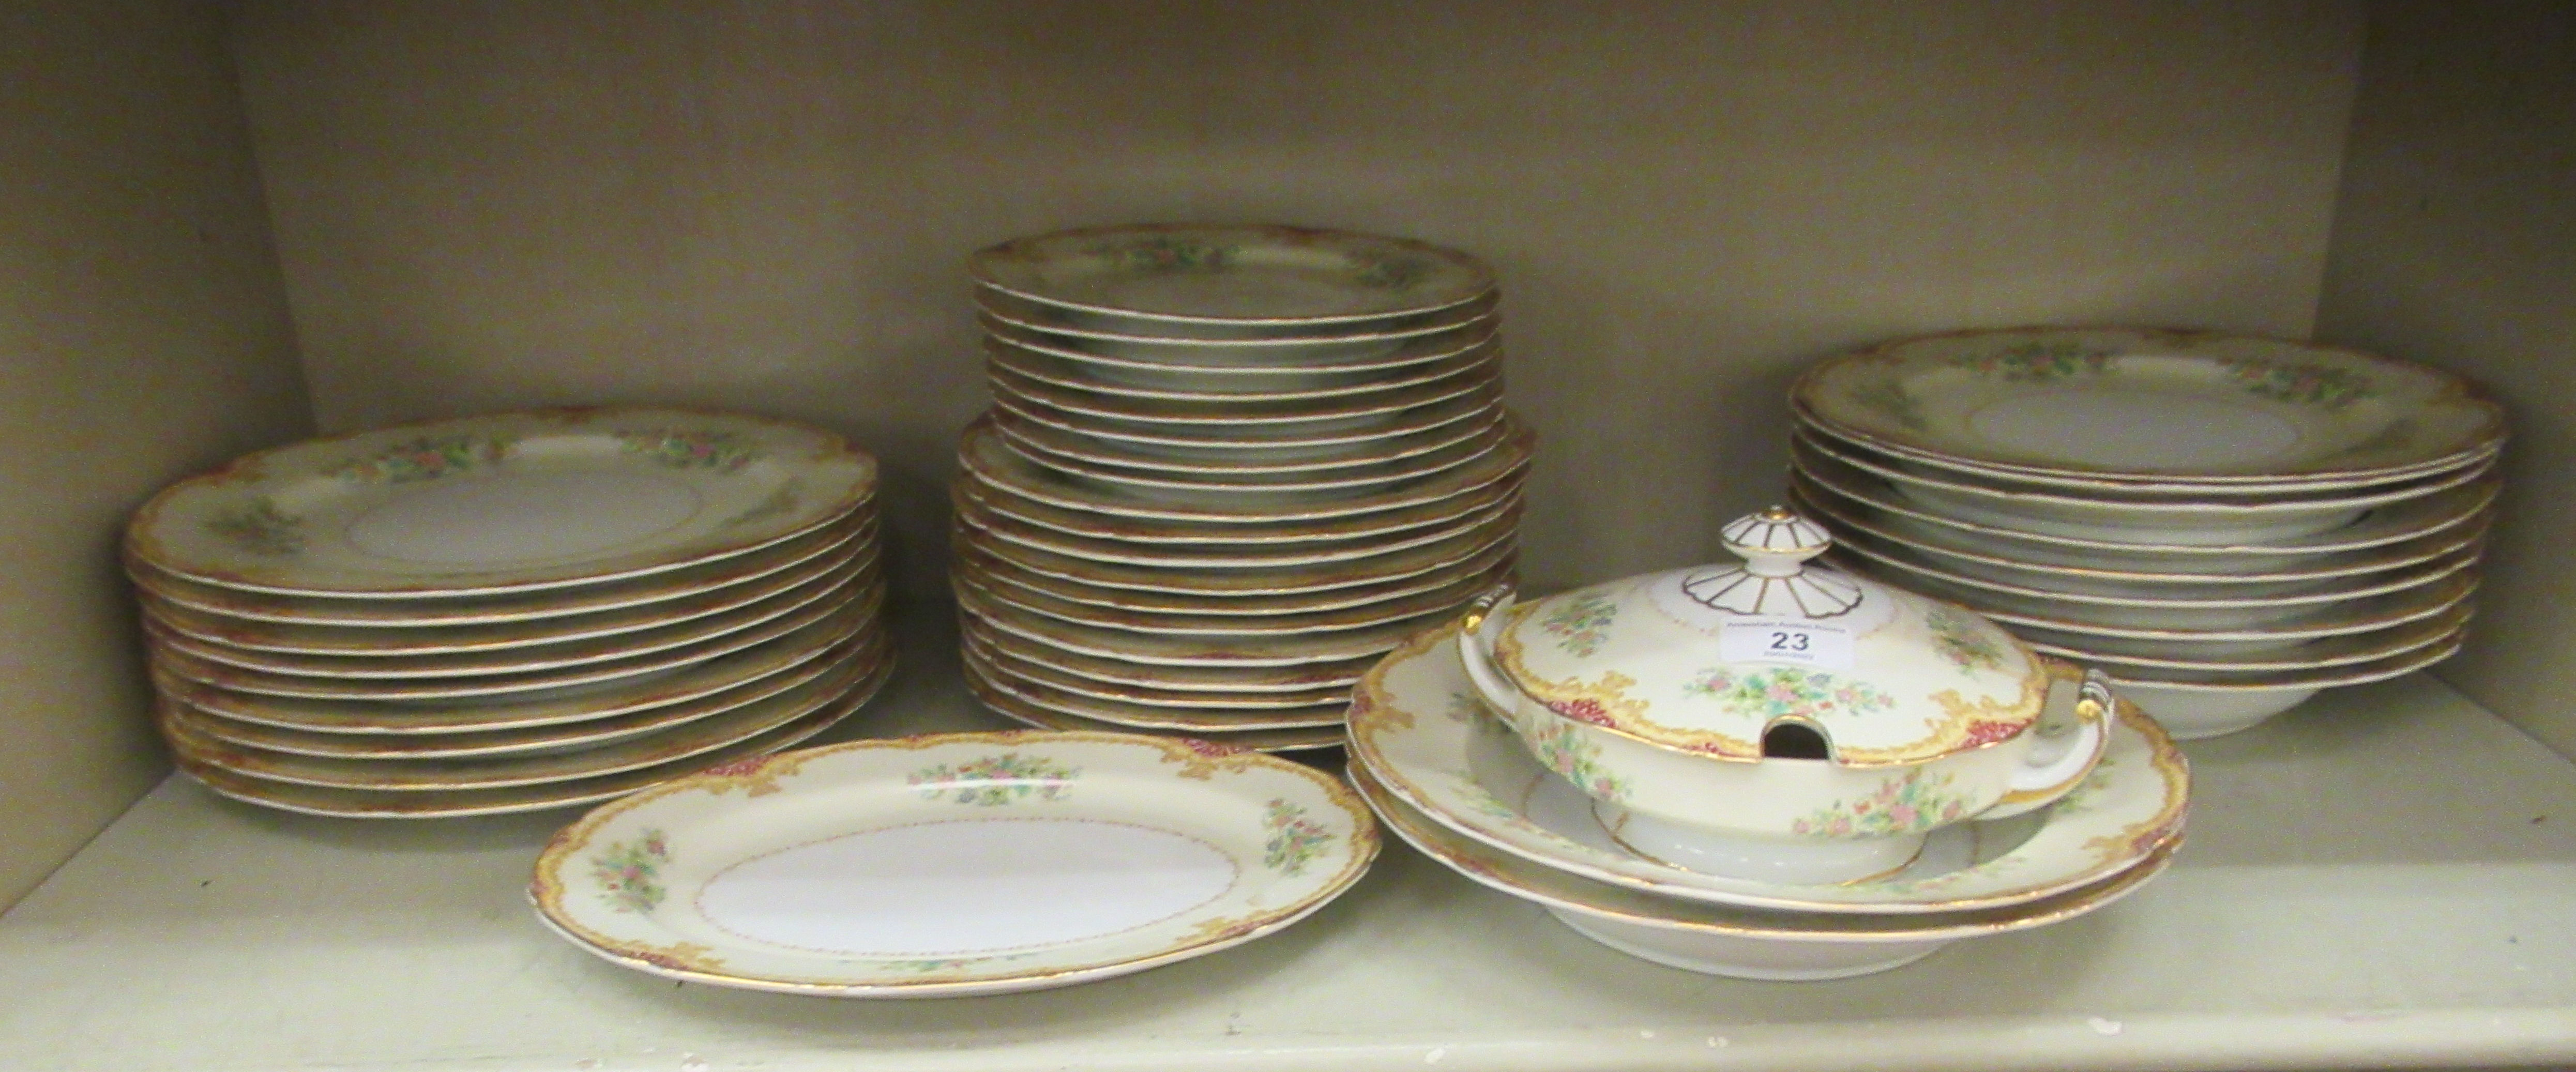 Noritake porcelain tableware, decorated with flora and gilding